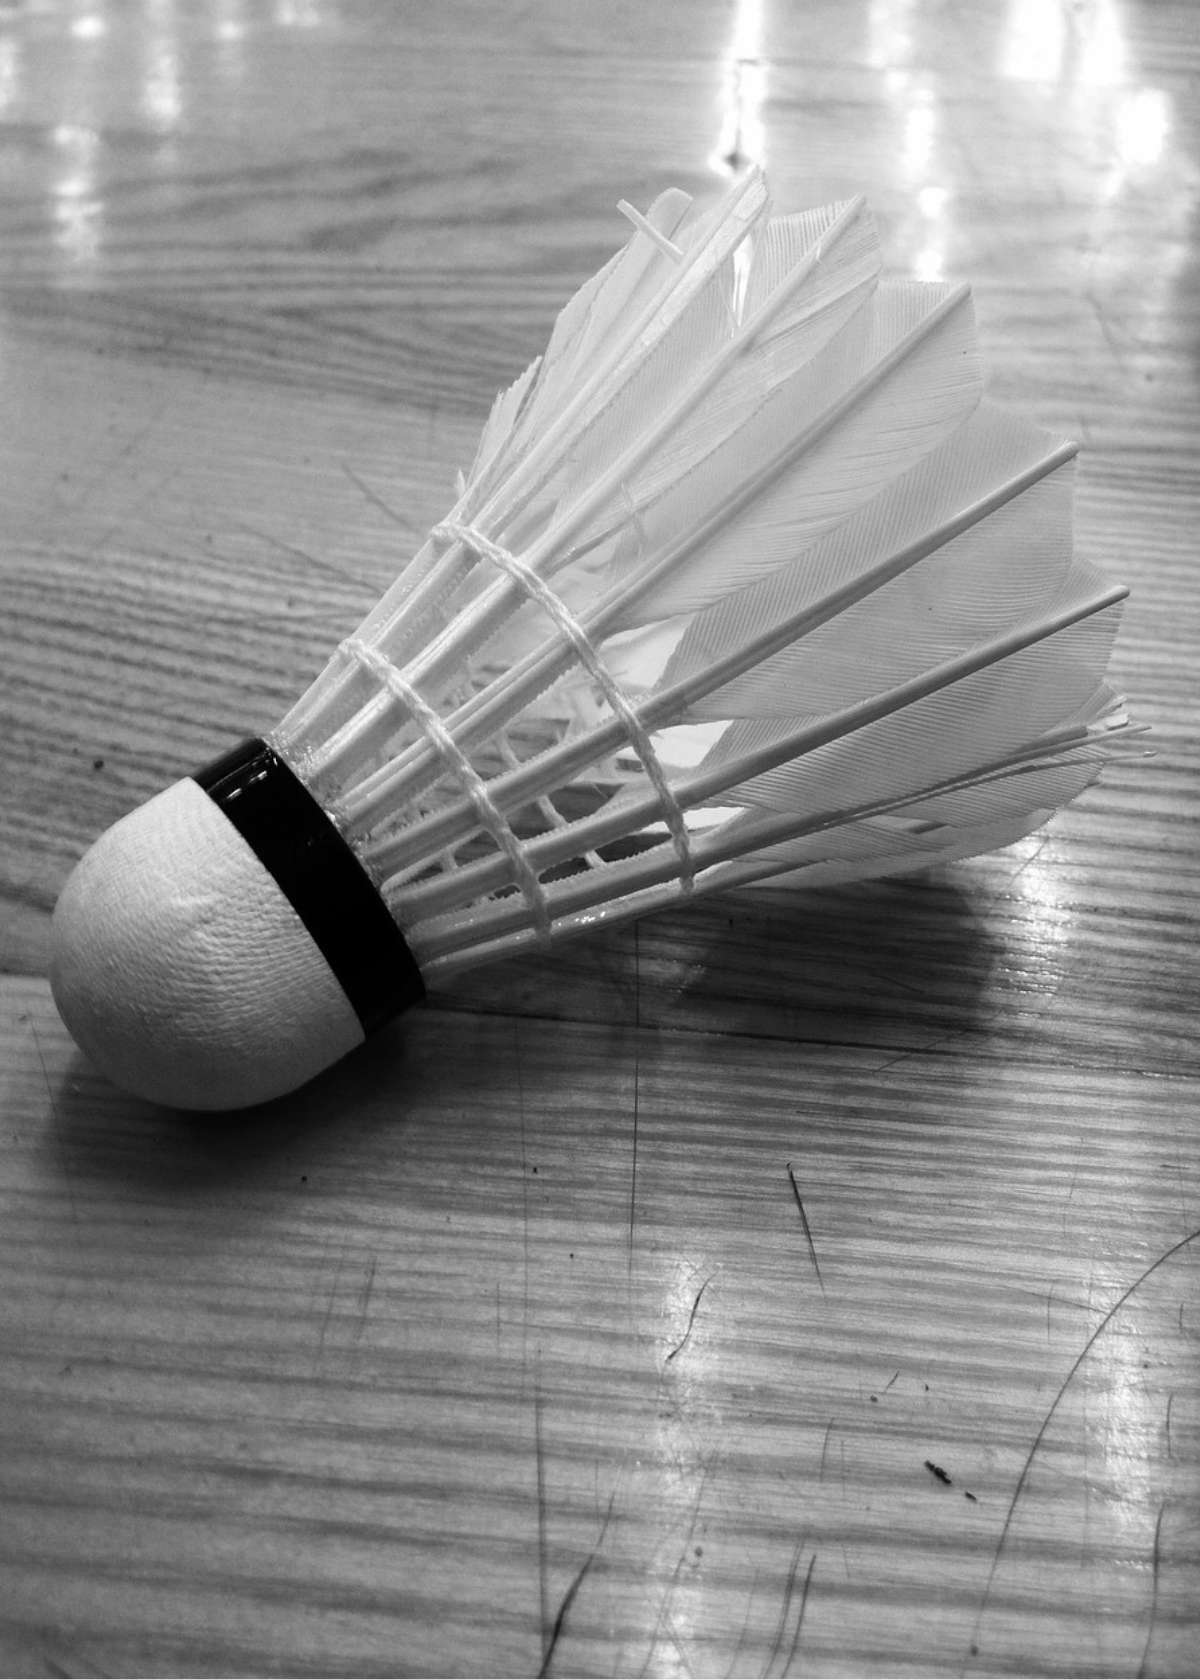 What is the badminton ball called